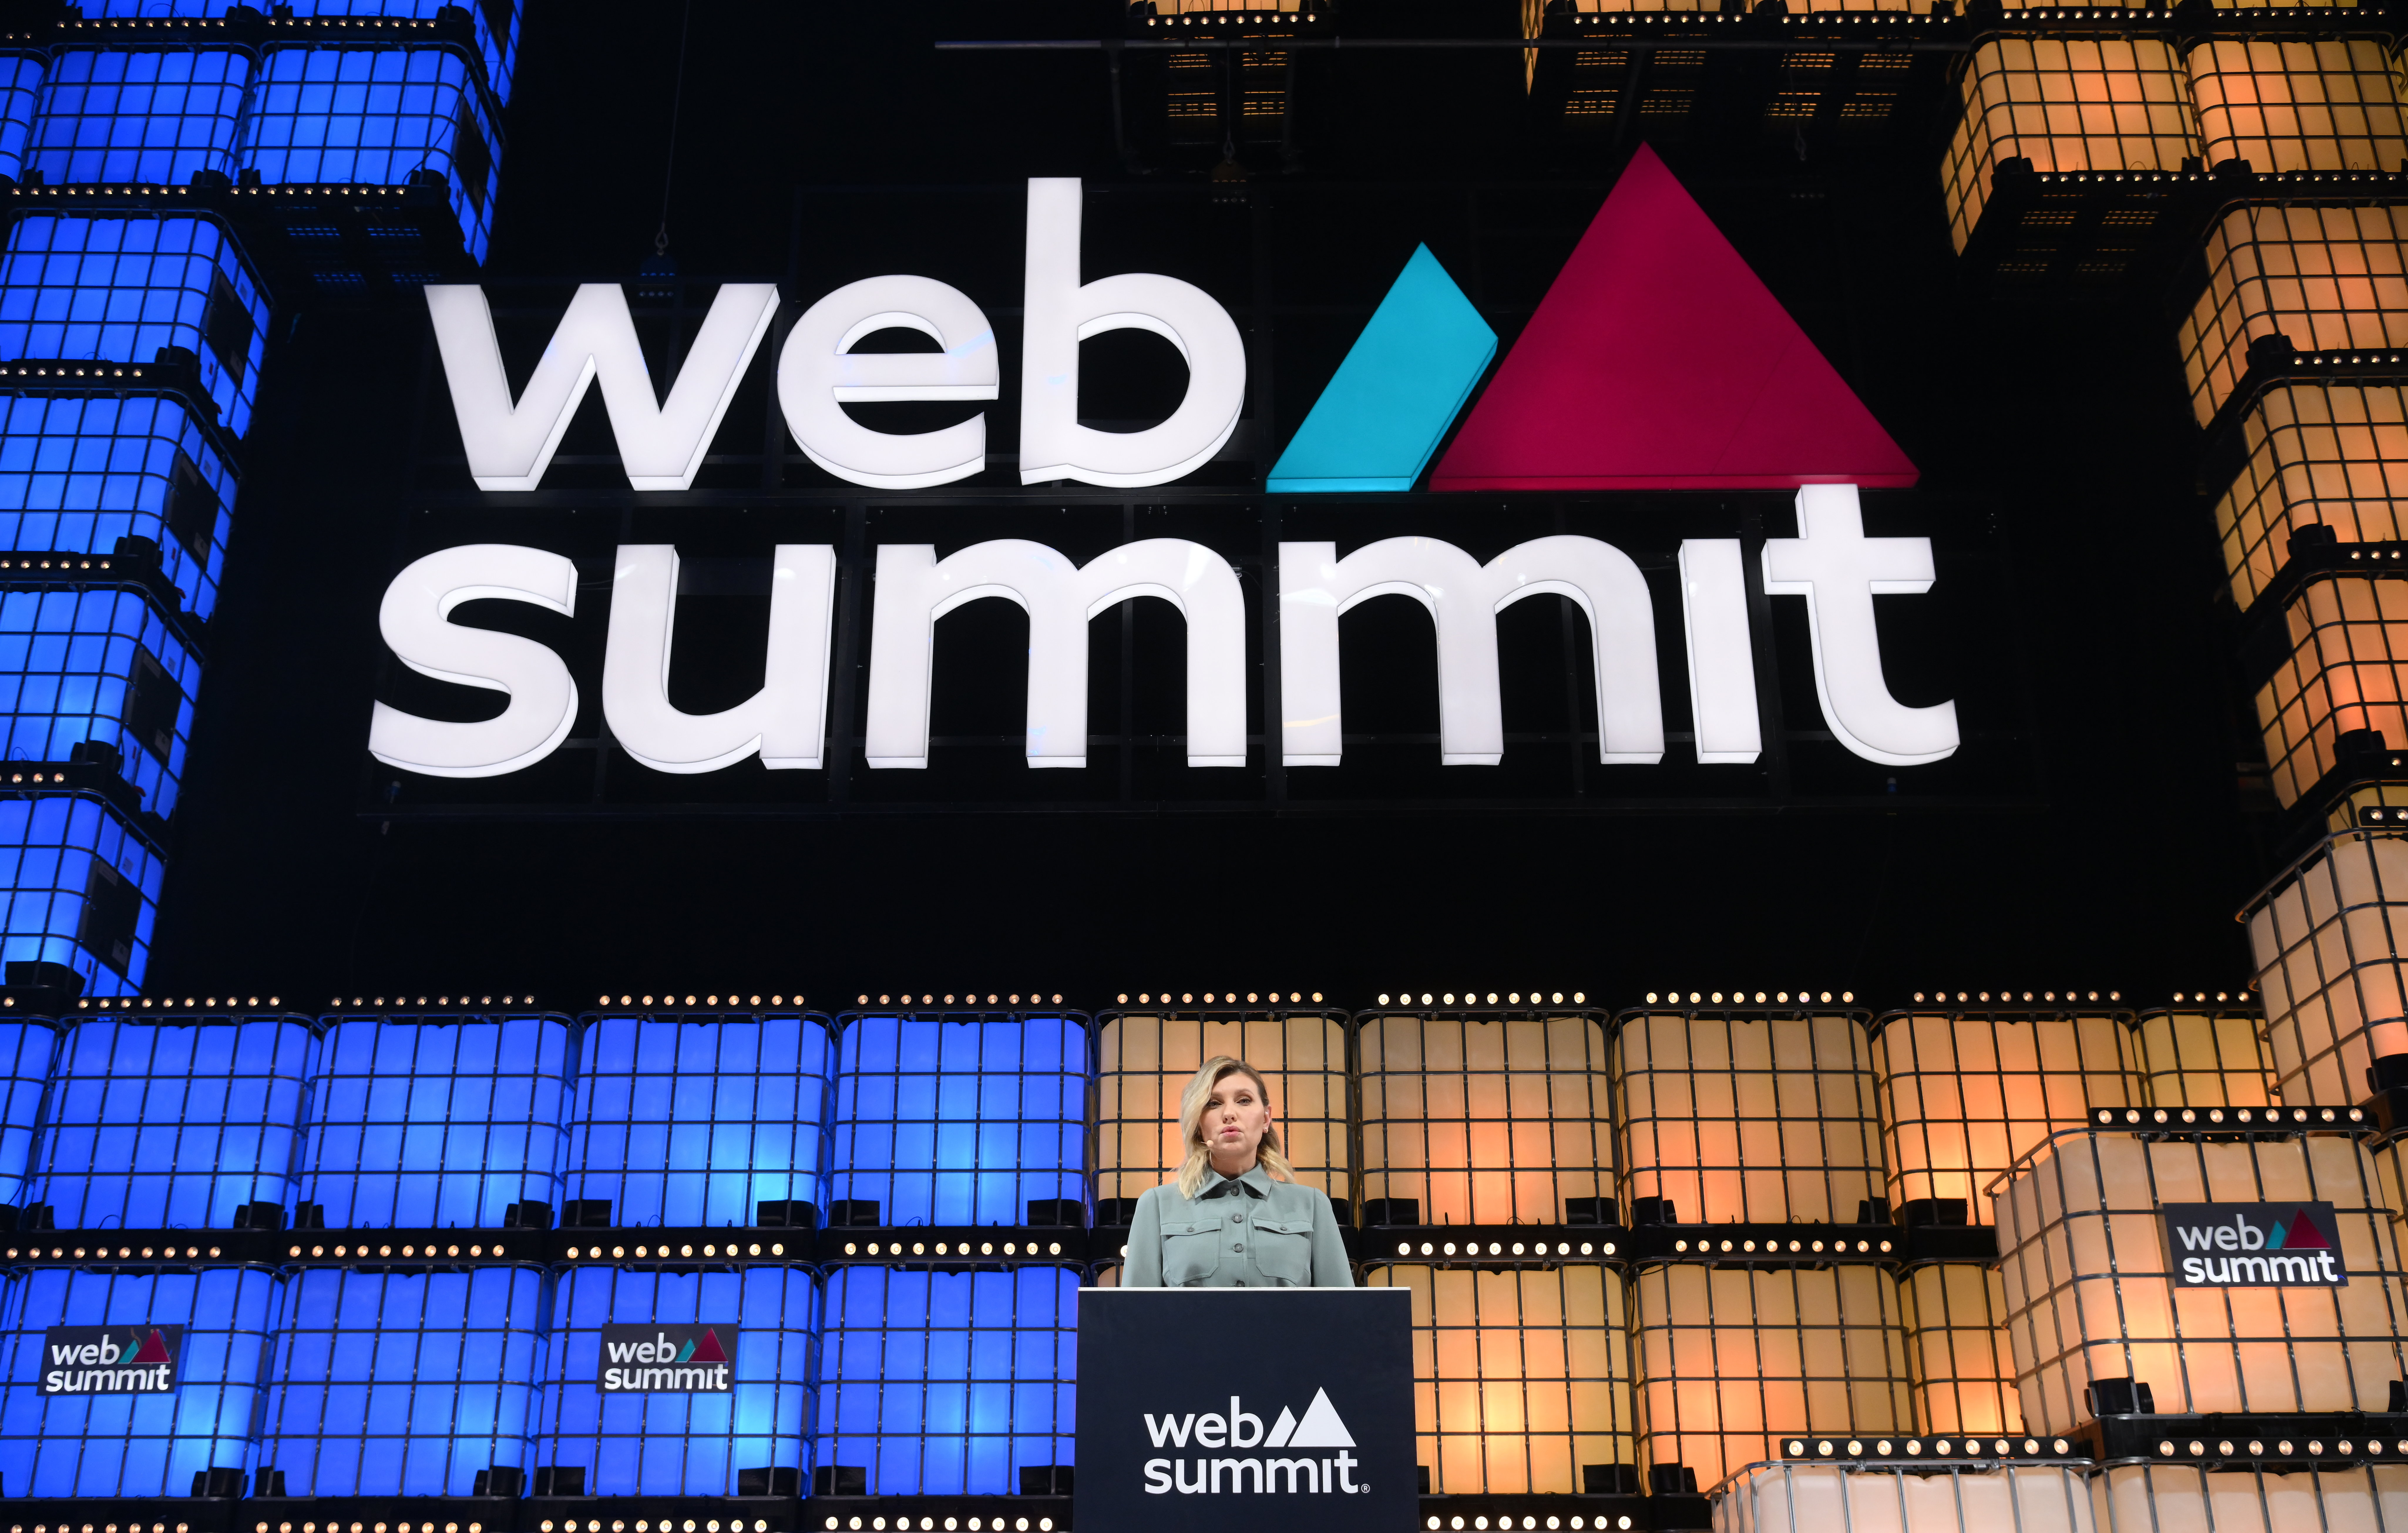 The good, the bad and crypto: How Web Summit tackled tech’s biggest
trends